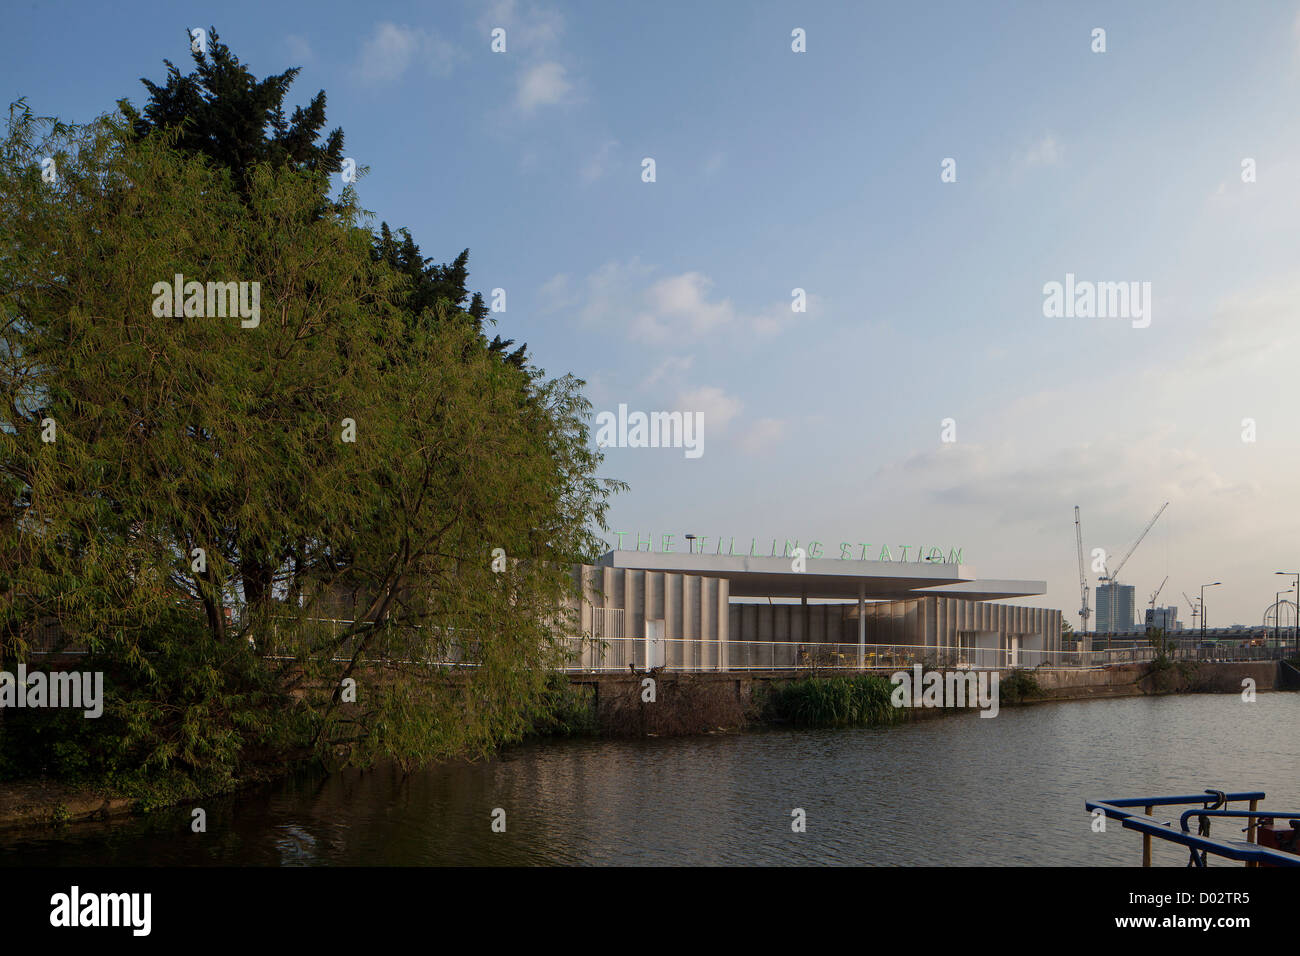 The Filling Station, London, United Kingdom. Architect: Carmody Groarke, 2012. Exterior view across the Regents Canal. Stock Photo